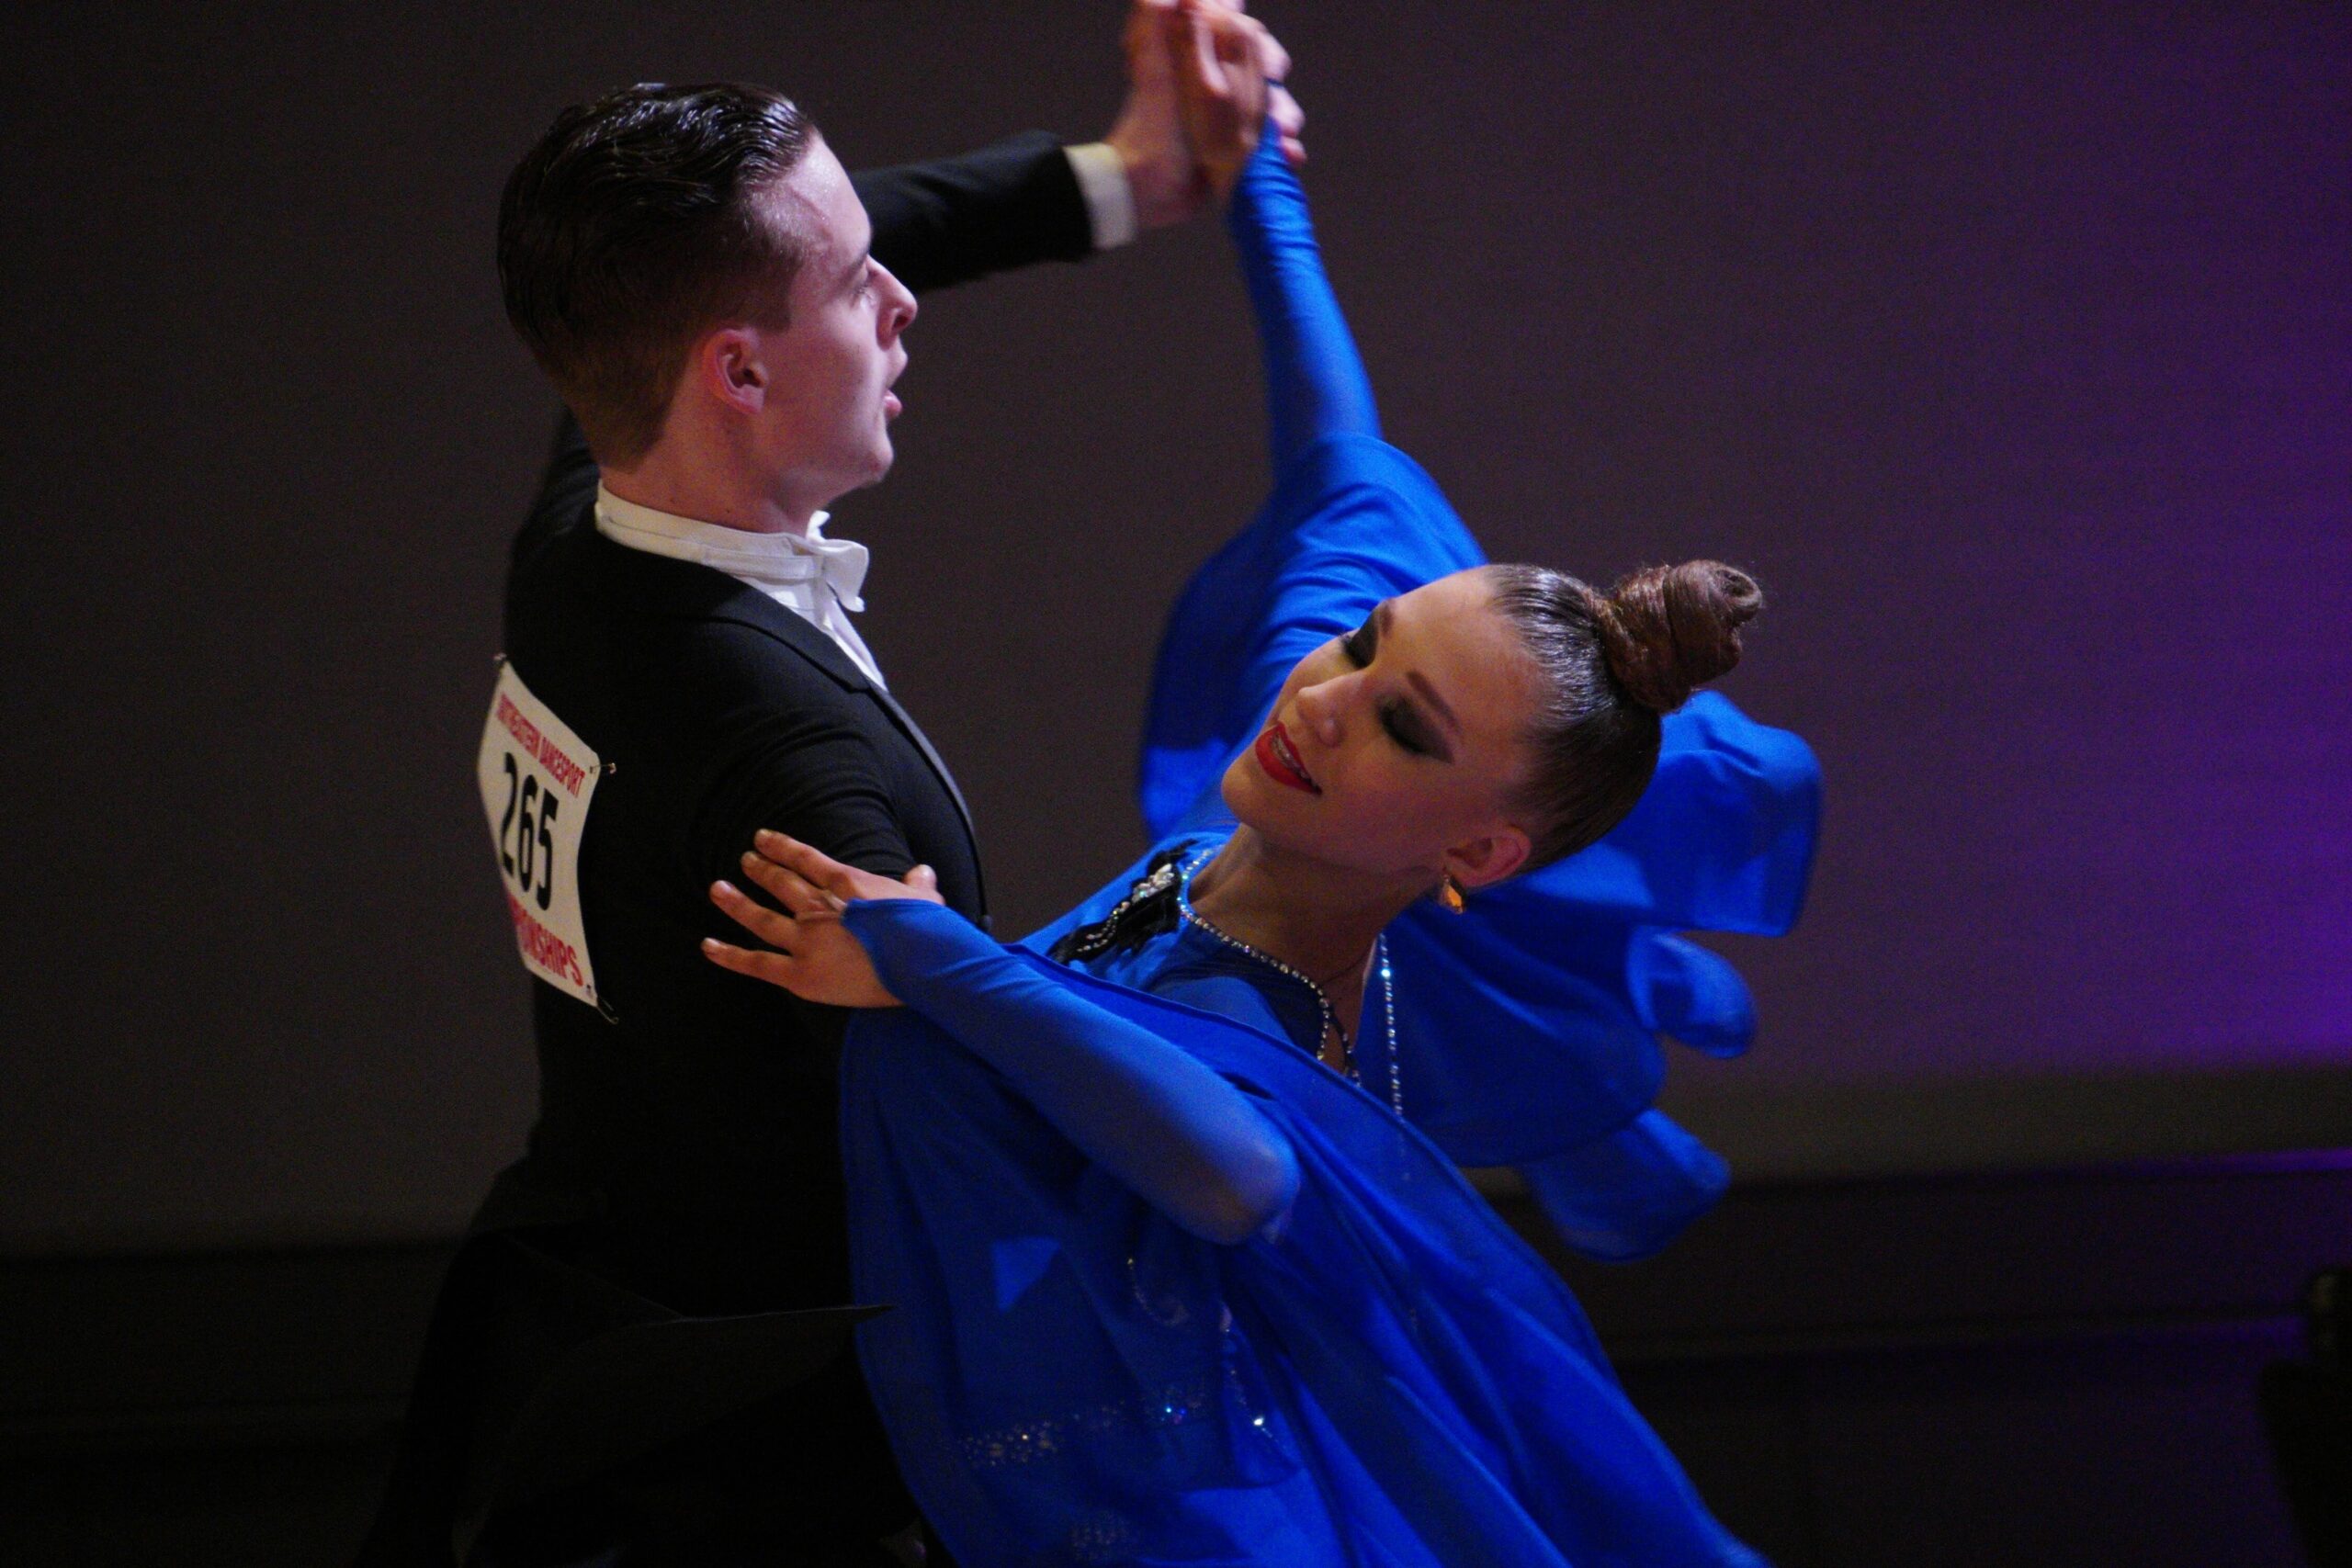 Youth International Standard couple Anthony Katchourine and Liza Belikov danced beautifully in their Championship round.